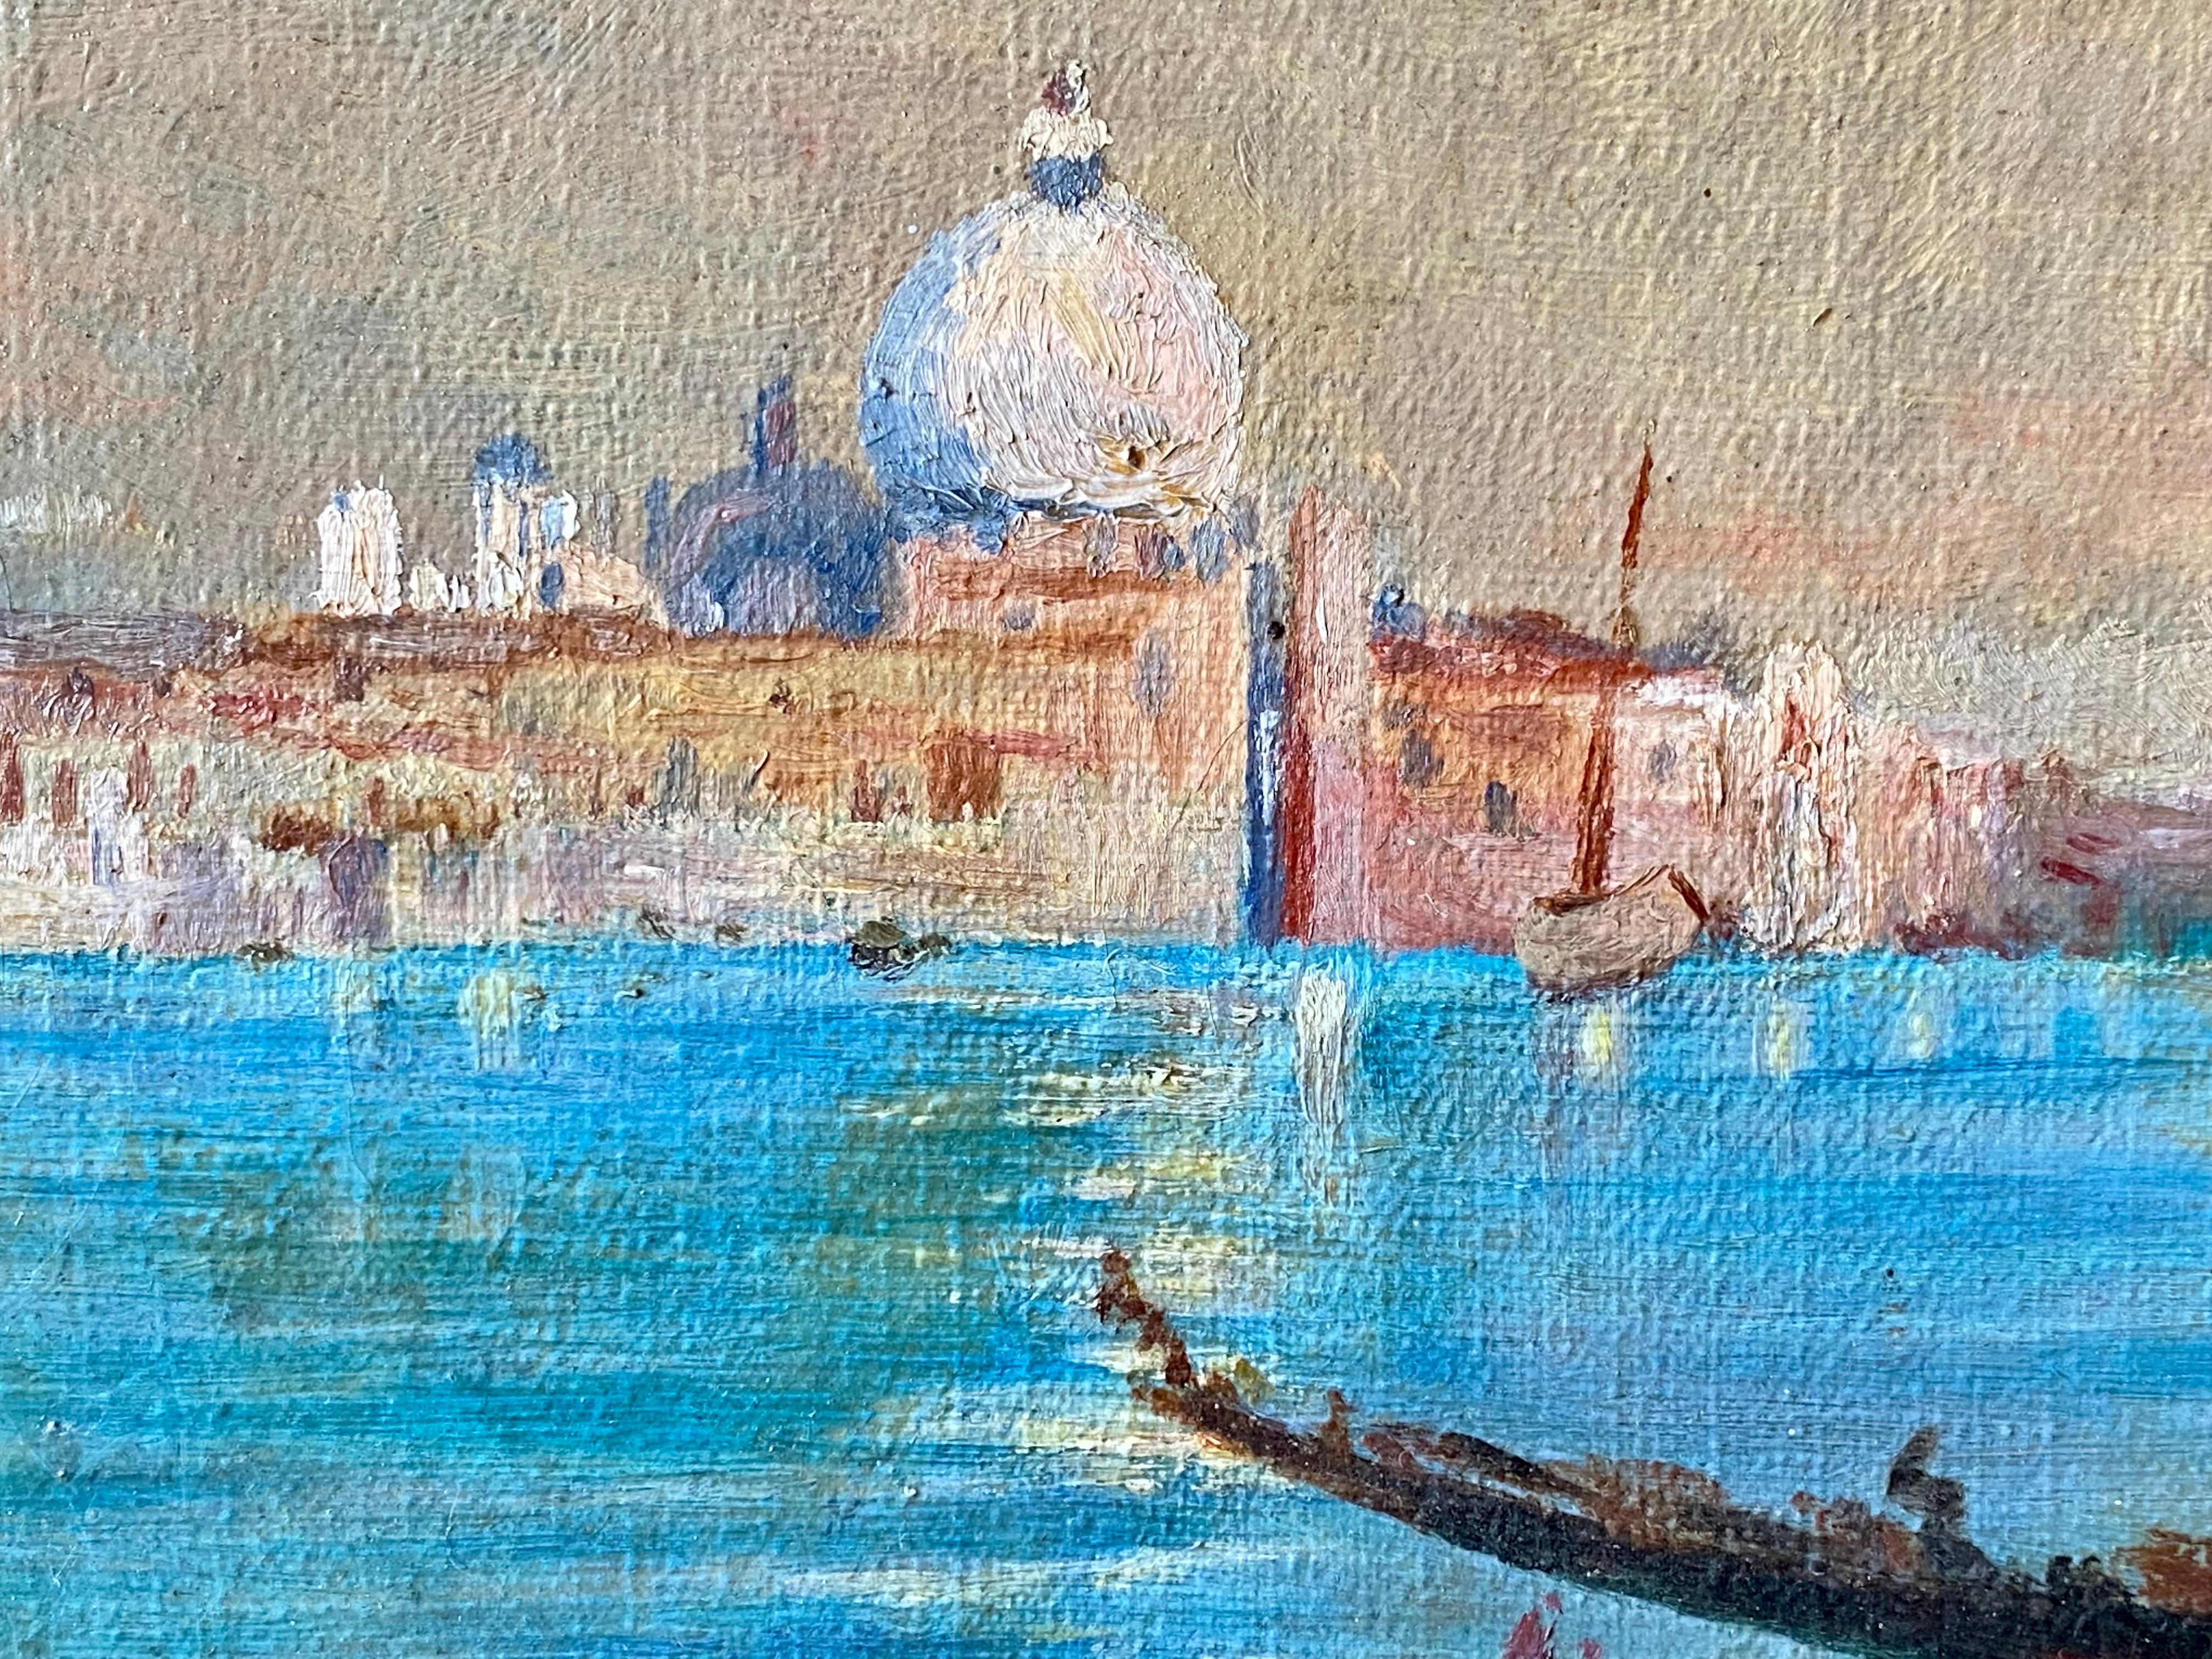 Large French impressionist painting of Venice by sunset

To the right of our painting we can see several gondola's with the Campanile tower of the Piazza San Marco visible in the background. In the distance to the left we can see the Cathedral of